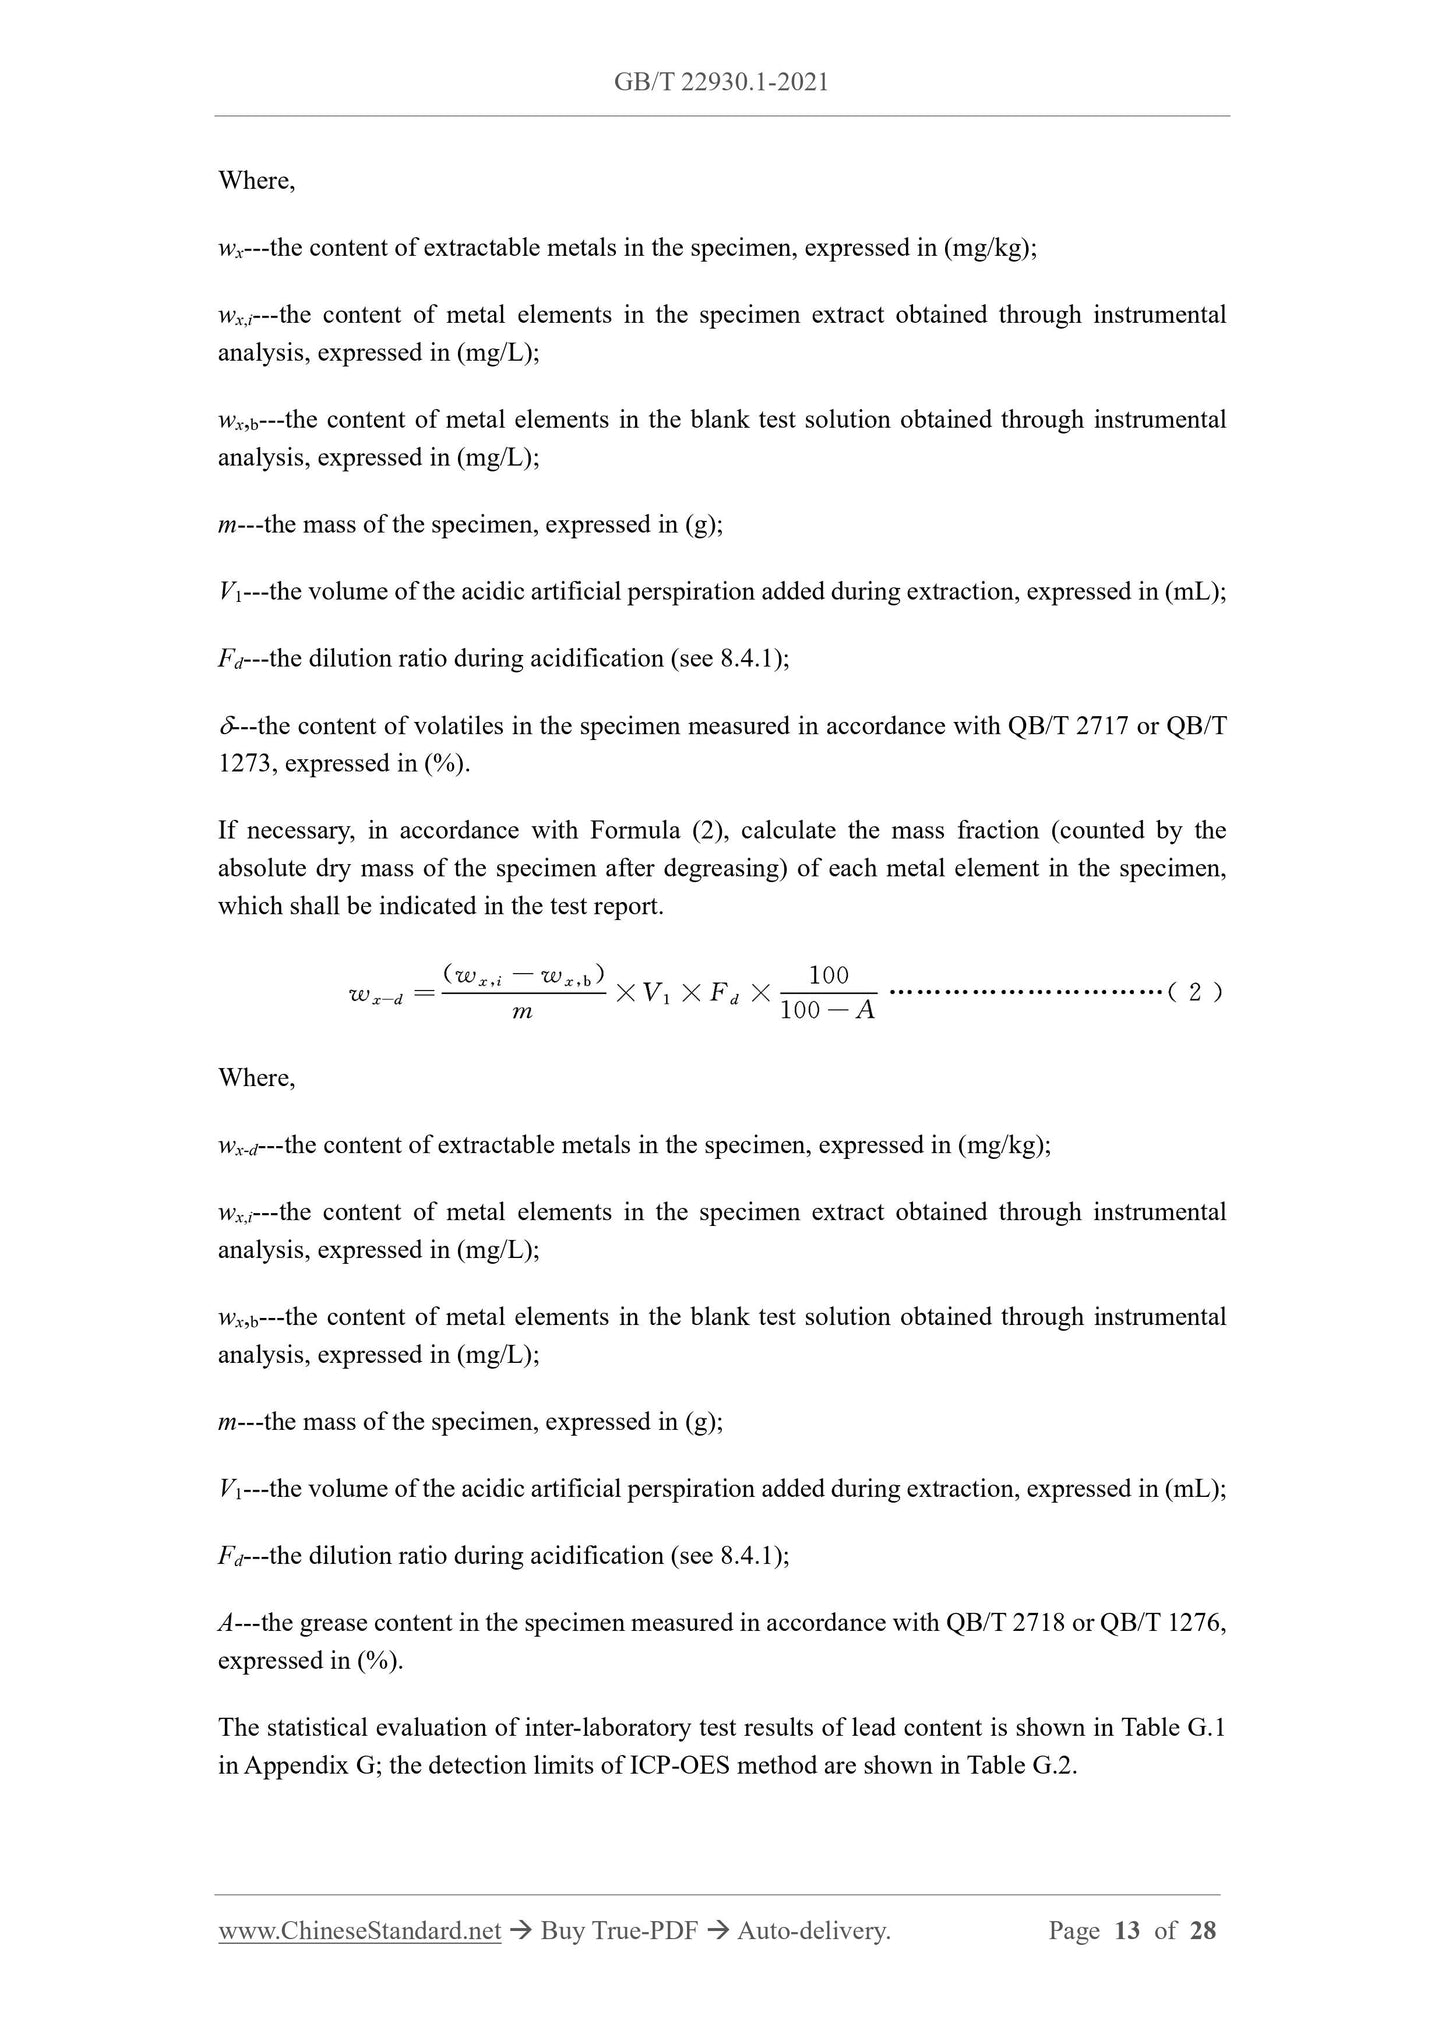 GB/T 22930.1-2021 Page 8